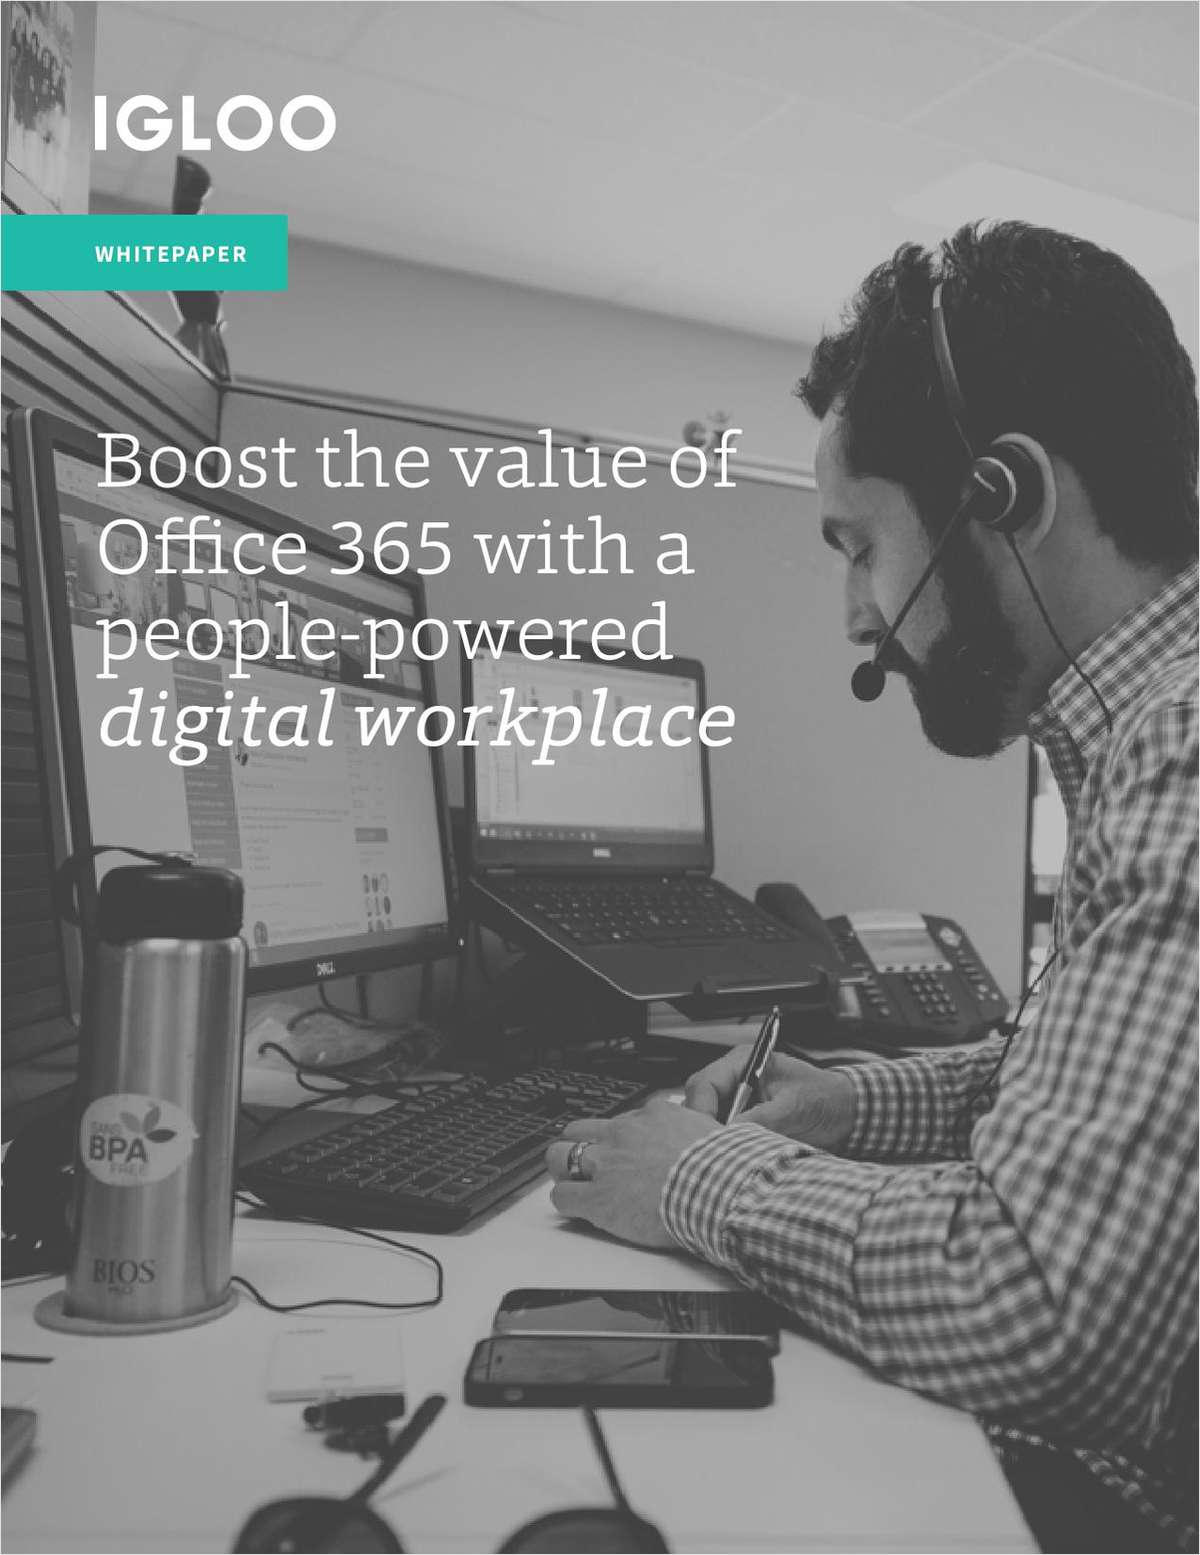 Boost the Value of Office 365 with a People-Powered Digital Workplace